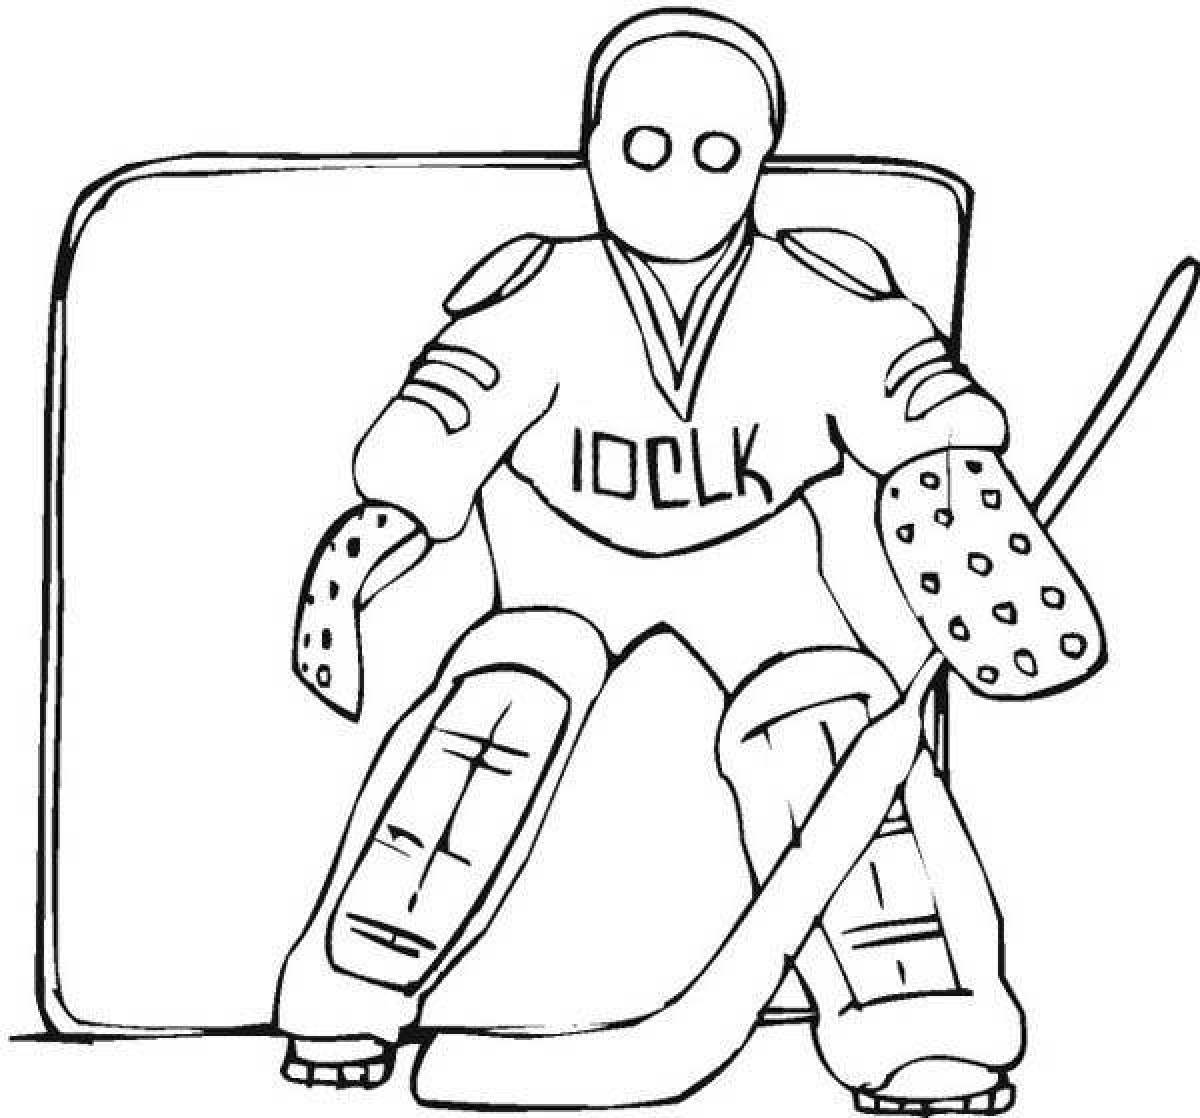 Shiny goalkeeper coloring page